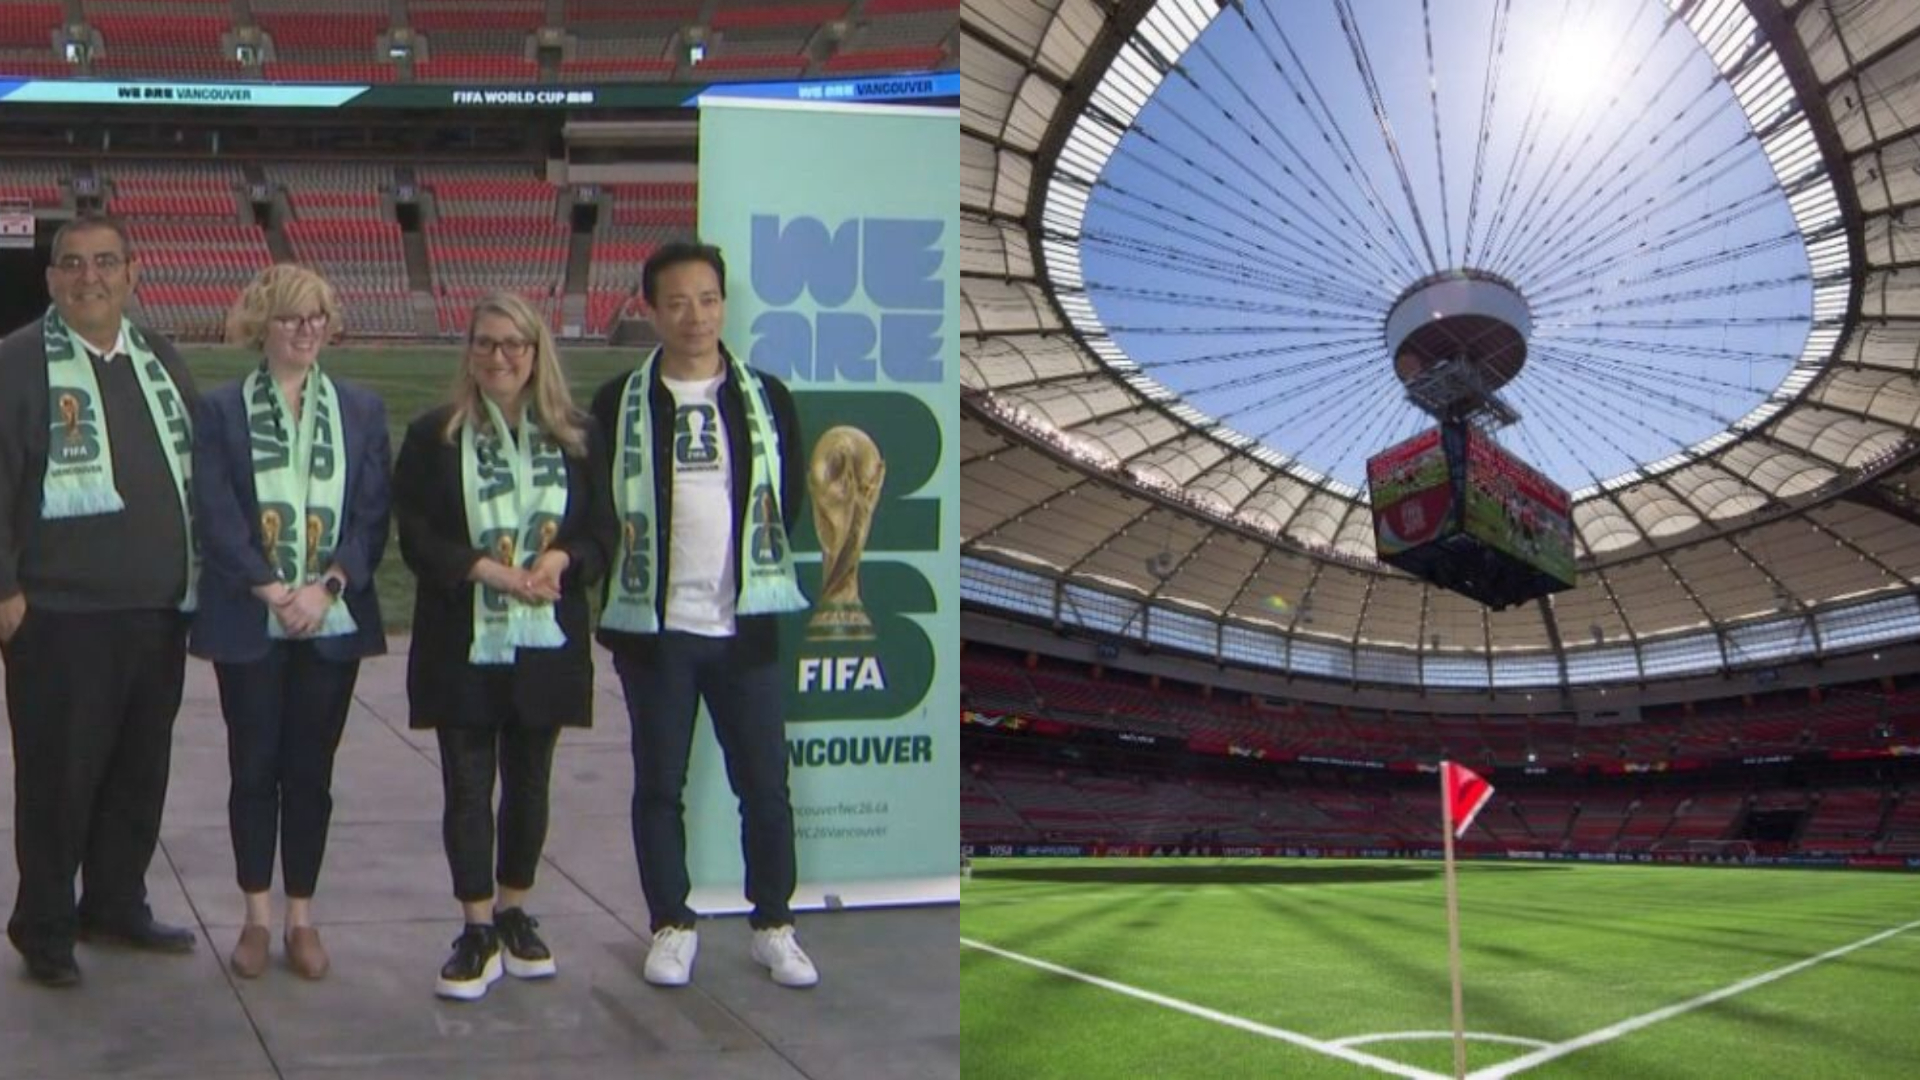 B.C.’s estimated FIFA costs double